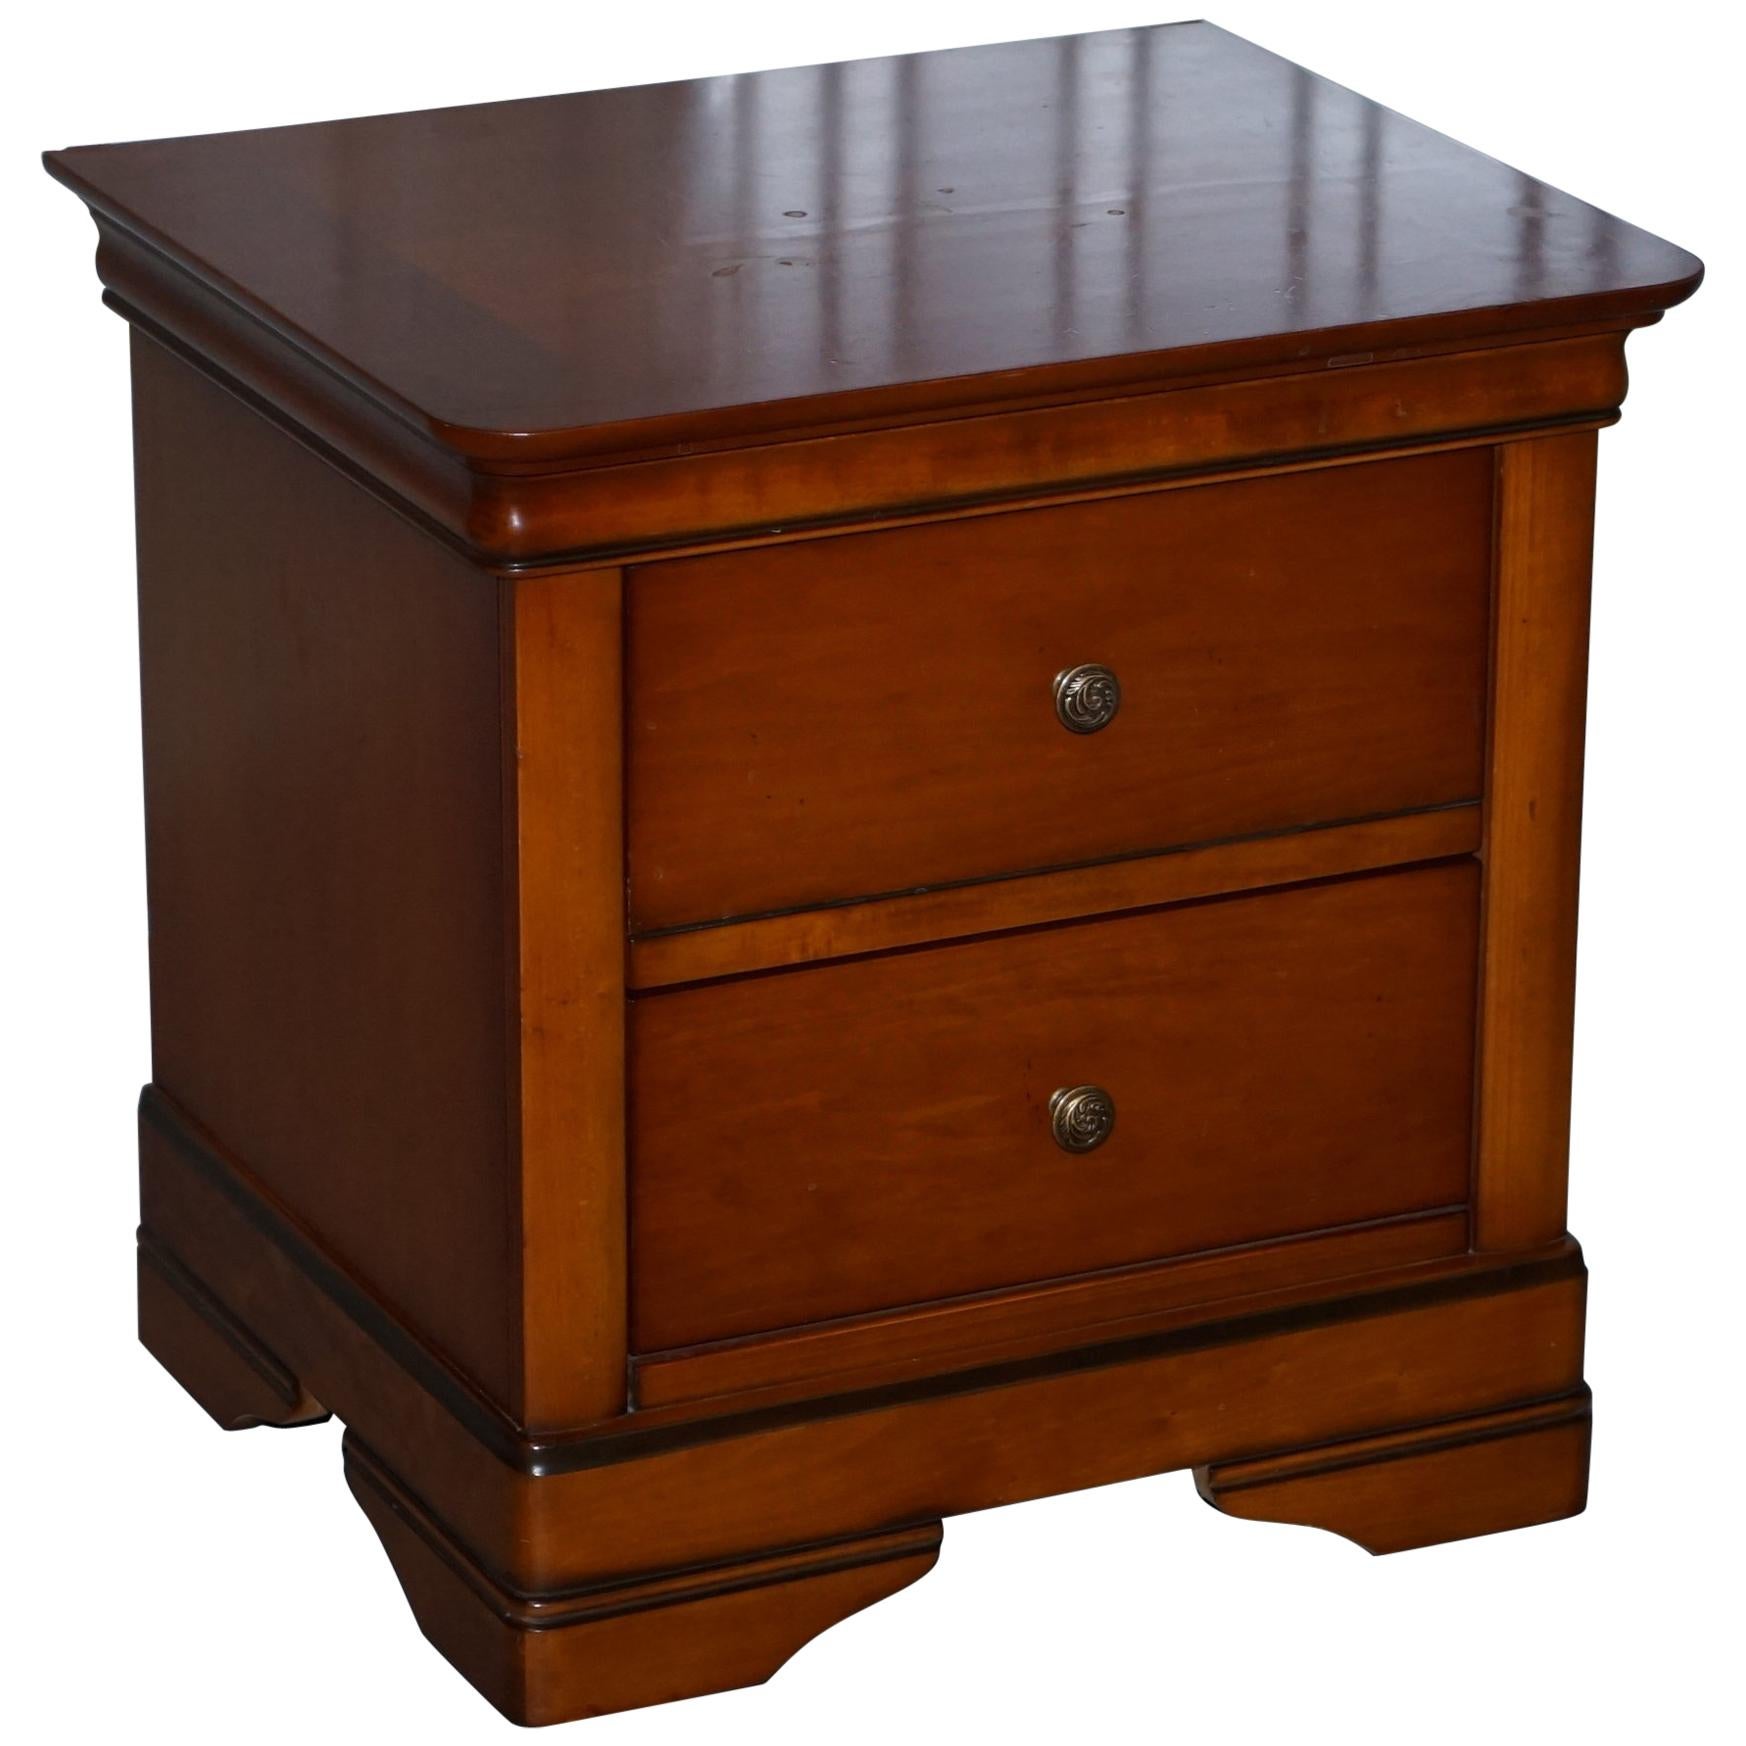 STUNNING SOLID CHERRY WOOD BEDSIDE TABLE CHEST OF DRAWERS PART OF A LARGE SUiTE